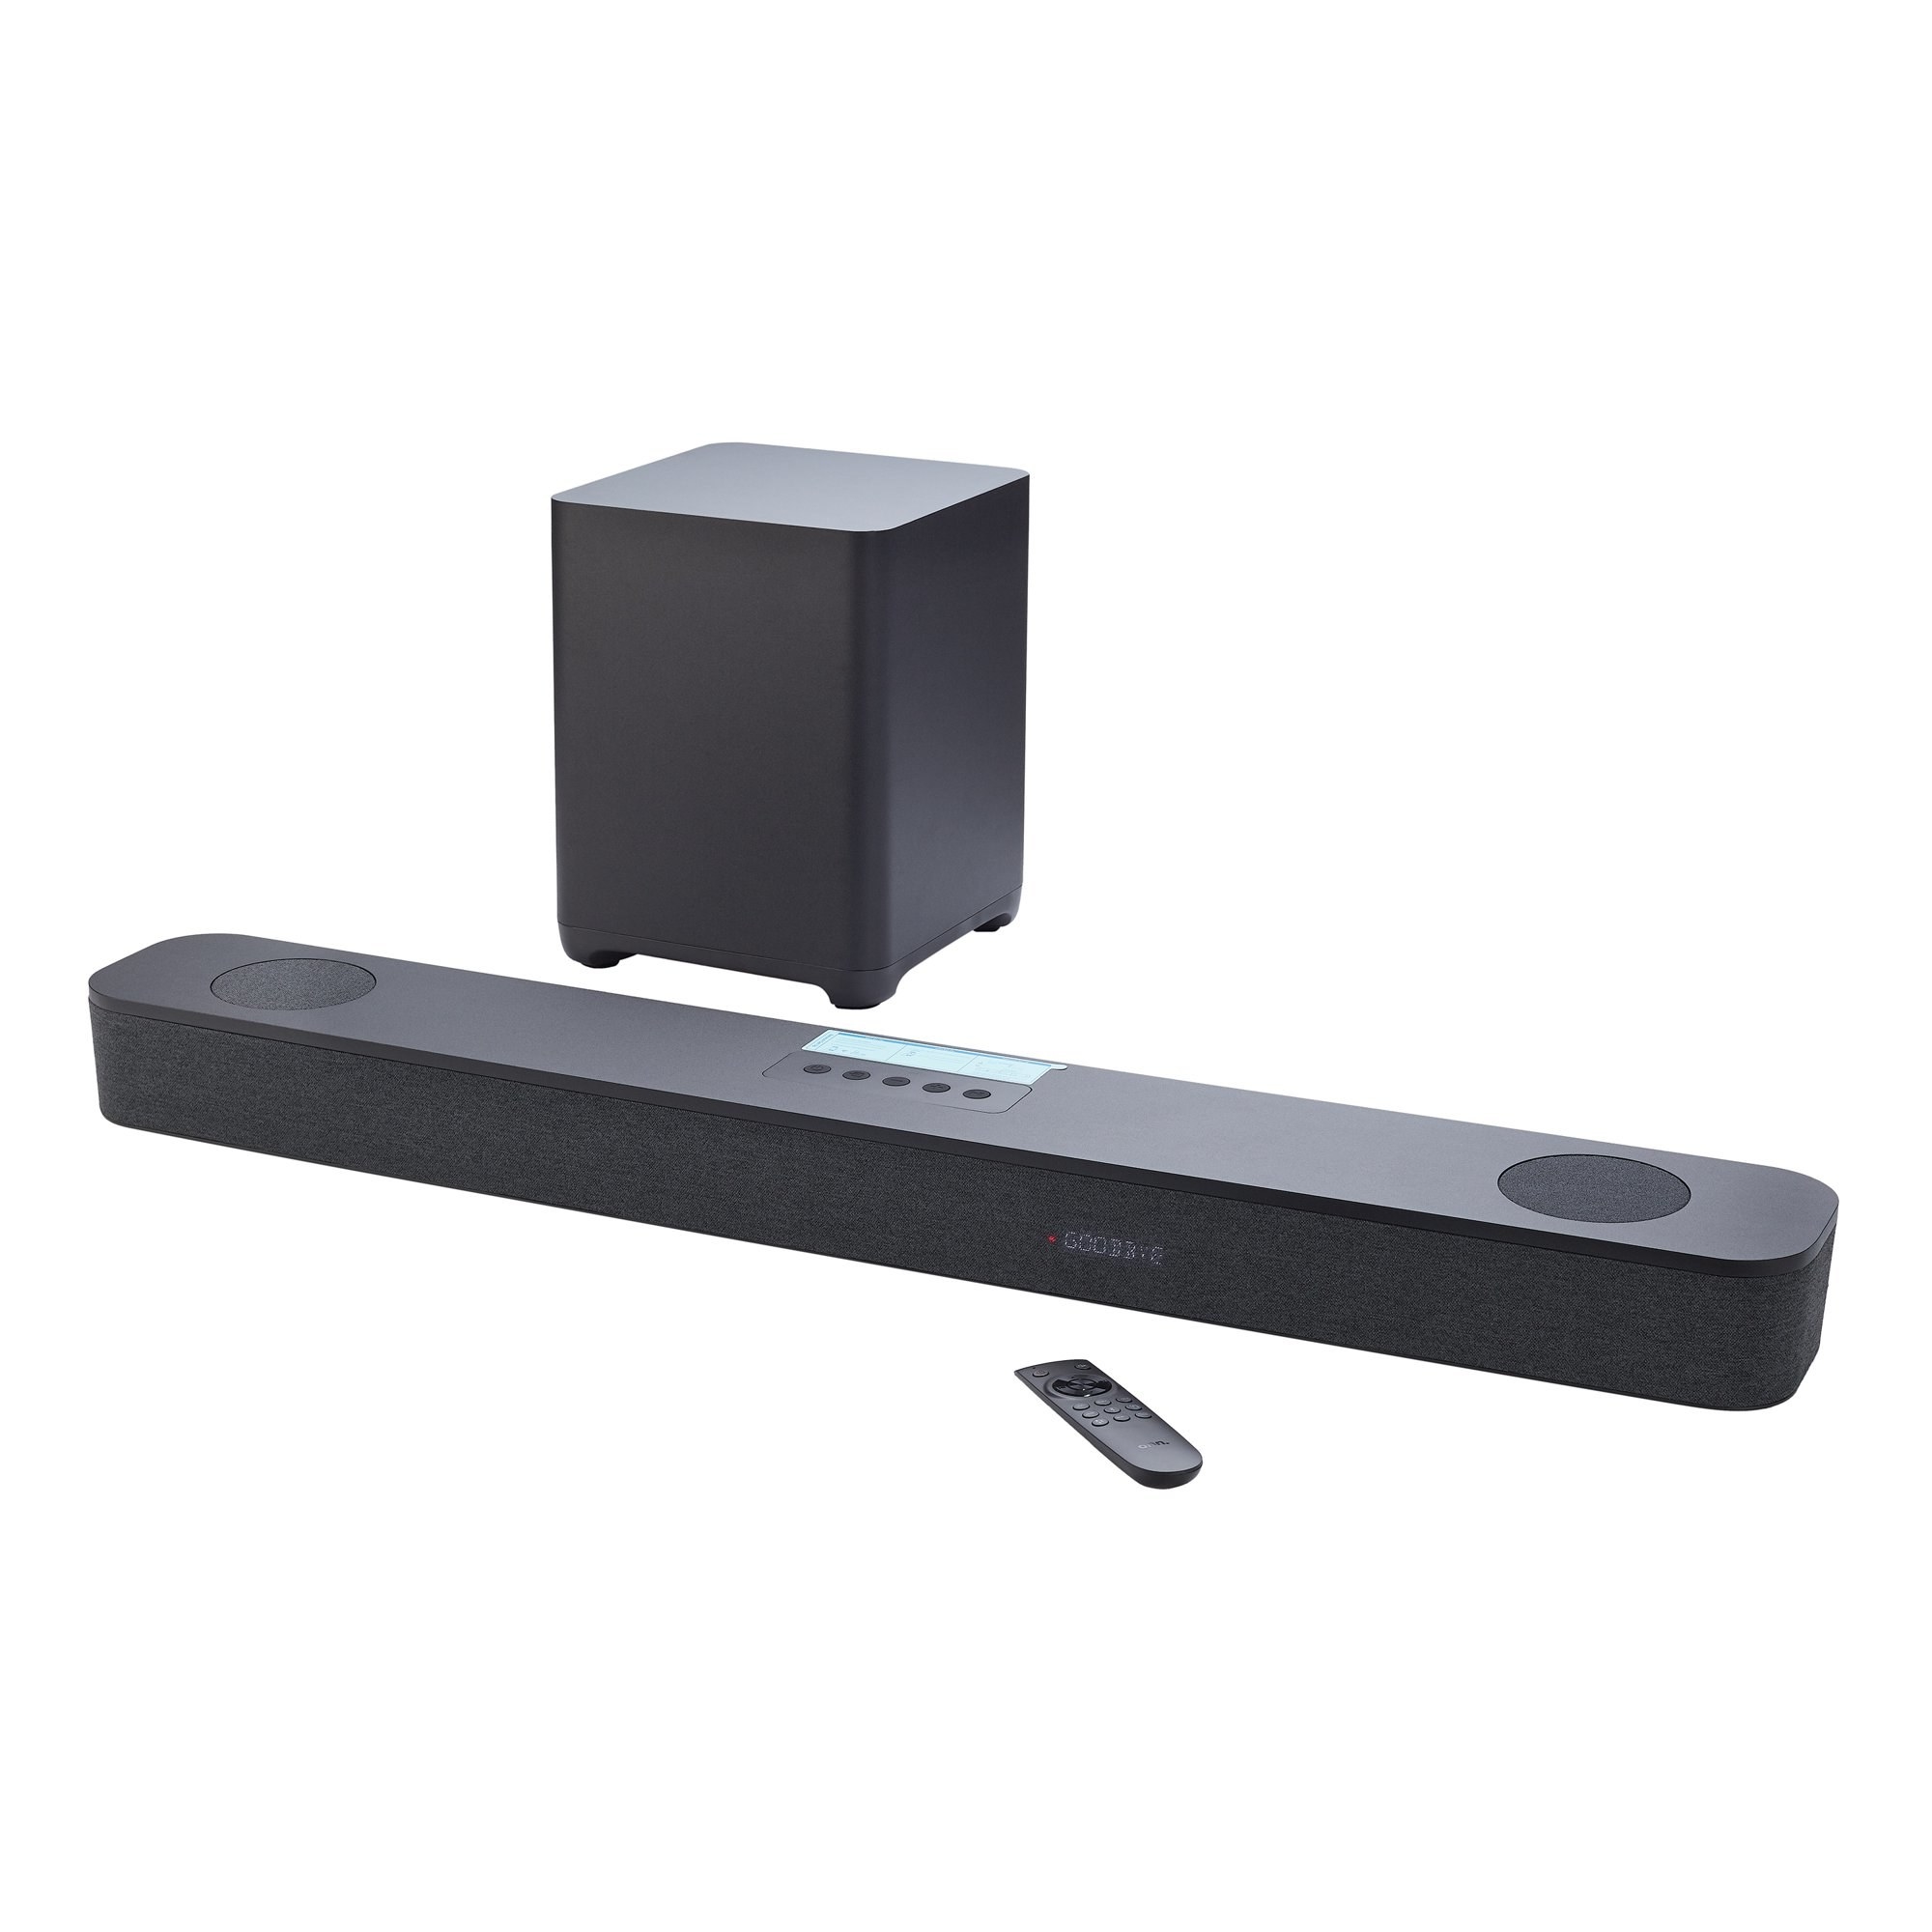 A sound bar, subwoofer, and remote control